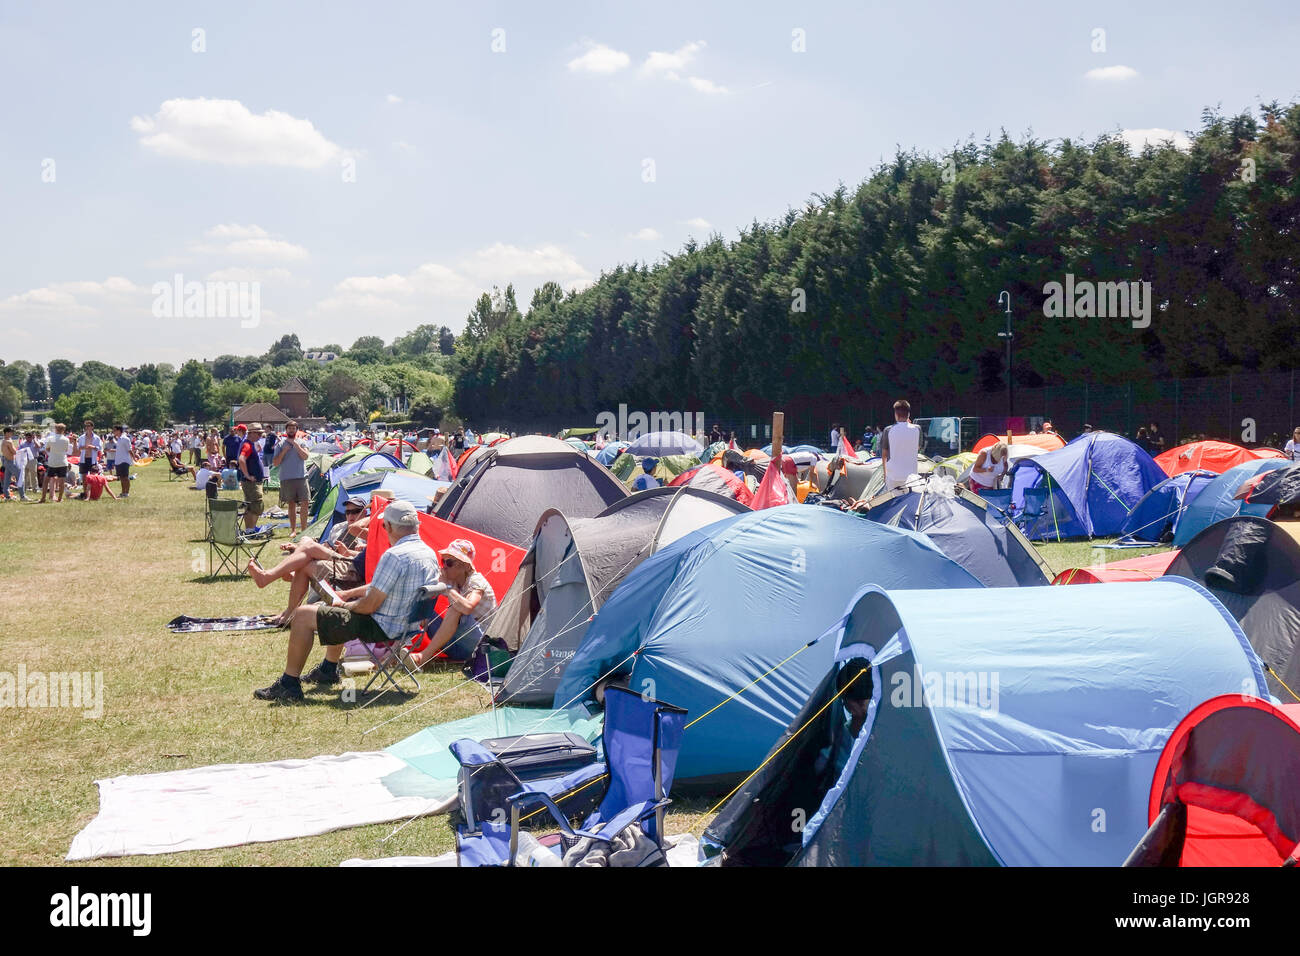 LONDON - JULY 5TH 2017: Tennis fans camp outside Wimbledon on the third day of the tournament at Wimbledon Park Stock Photo